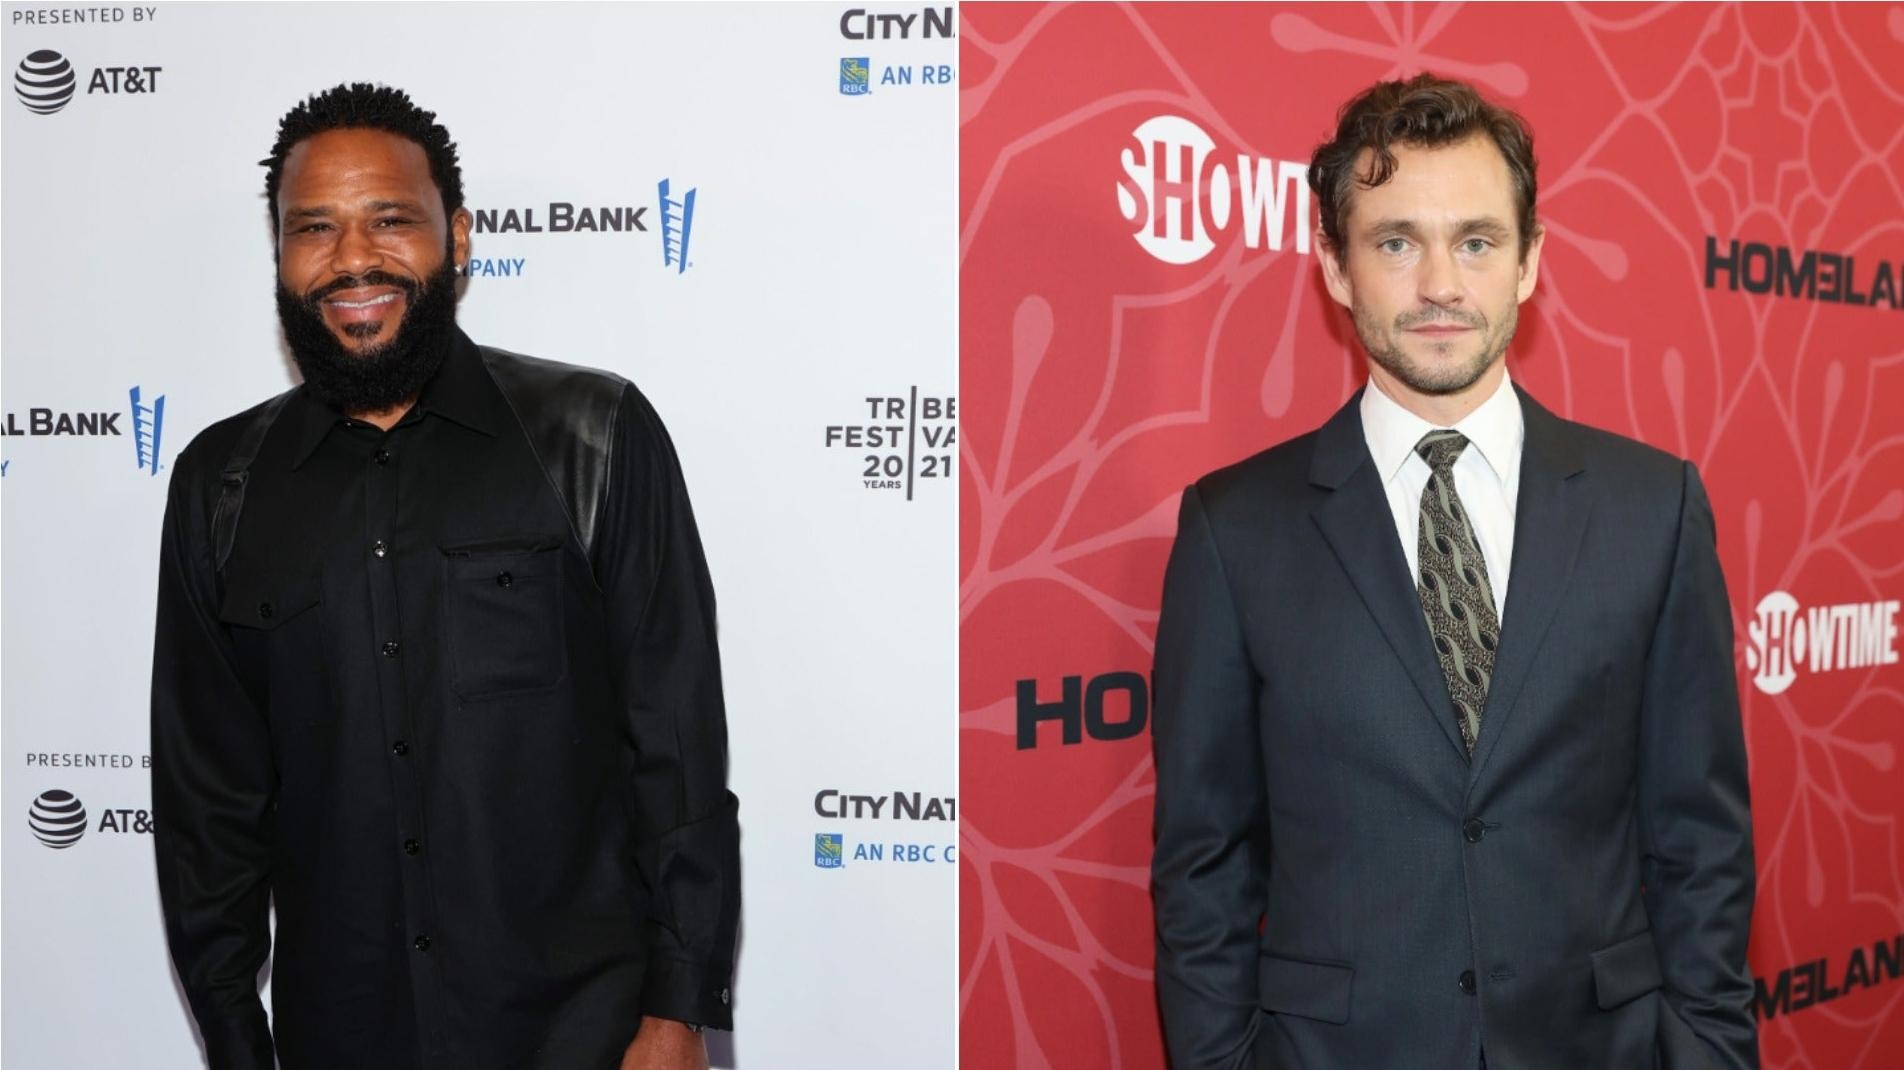 NBC’s new (old) Law & Order adds Anthony Anderson and Hugh Dancy